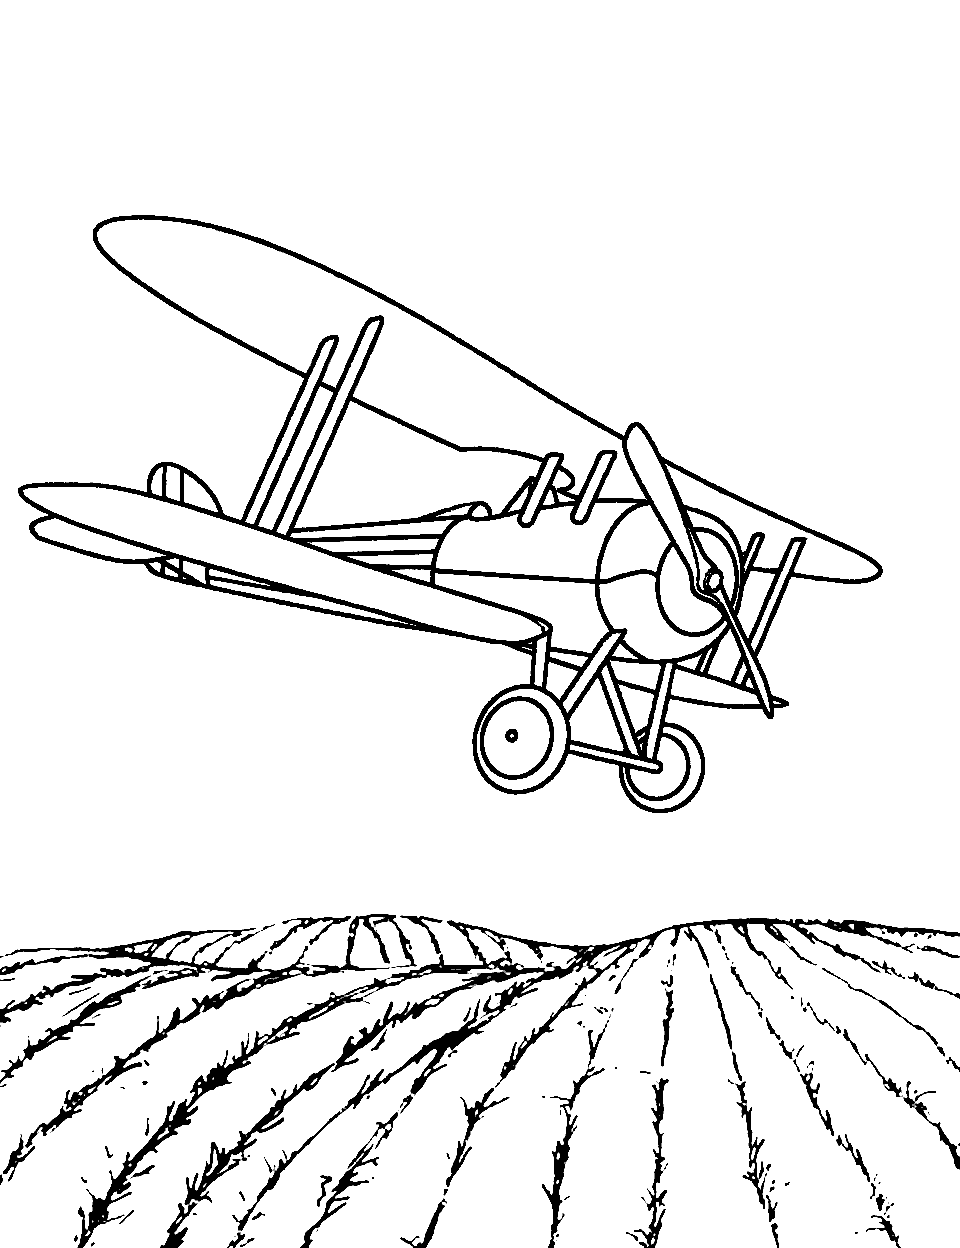 Dusty Crop Duster Airplane Coloring Page - An old-fashioned biplane dusting crops in a rural field.